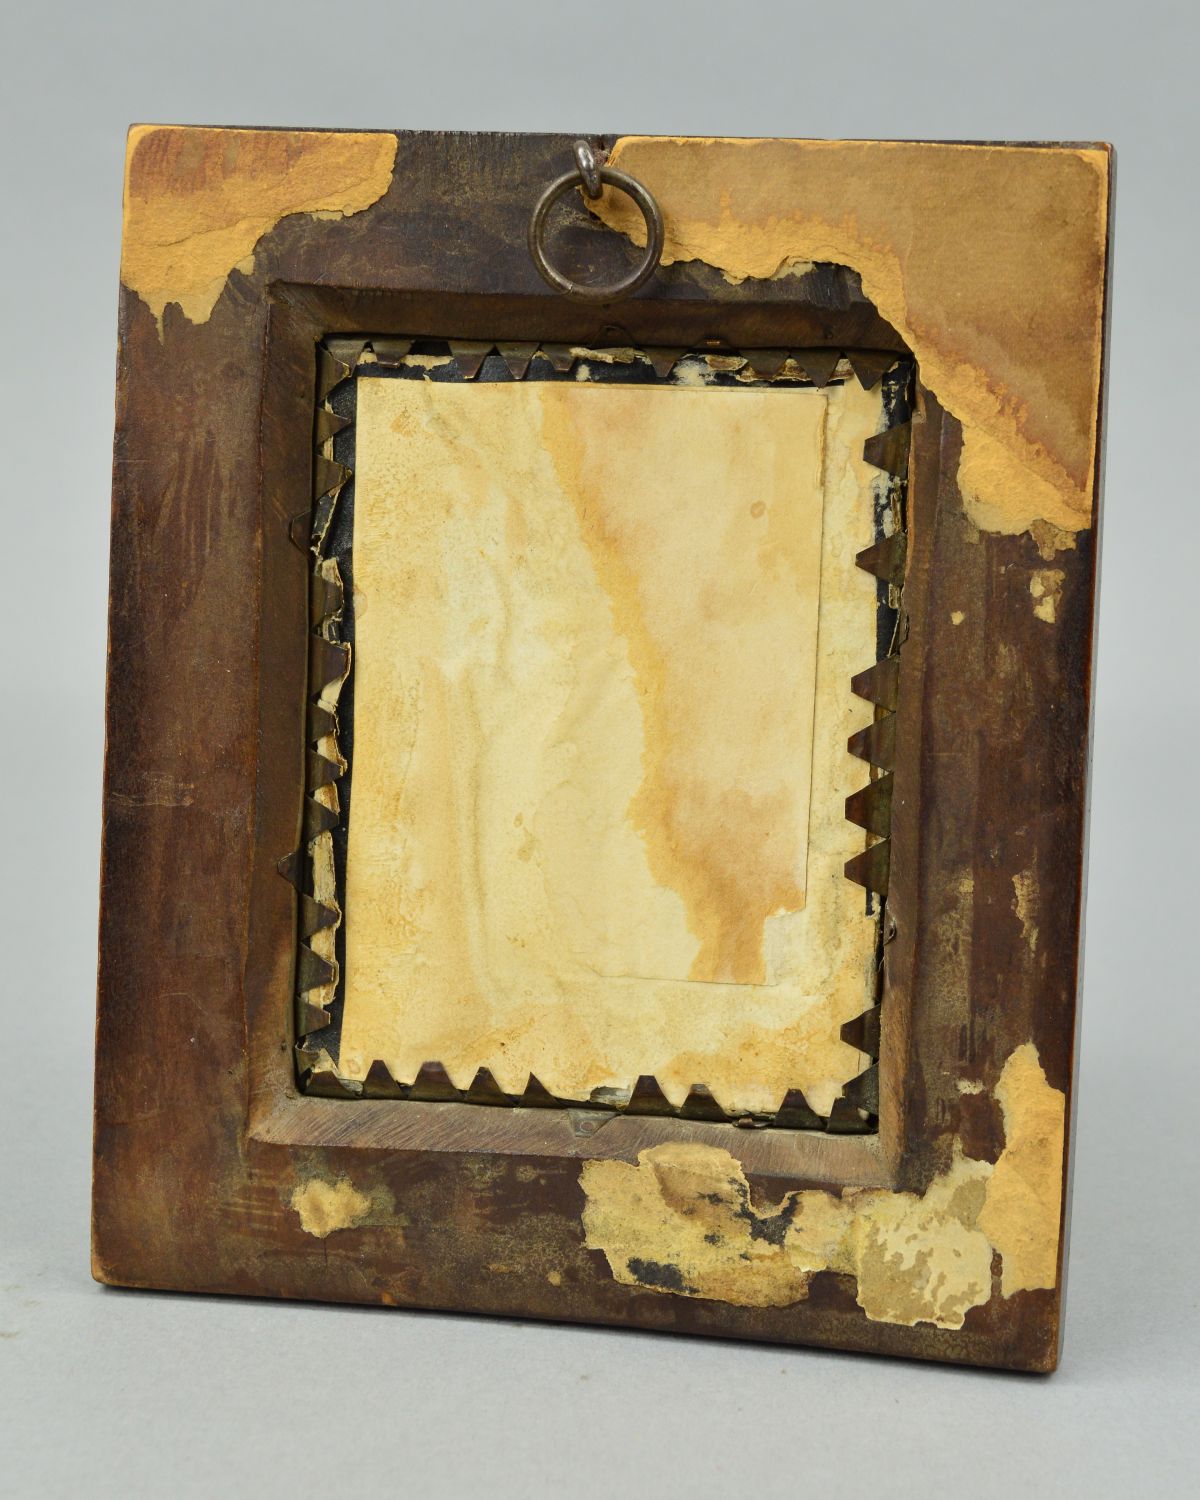 A SMALL ANTIQUE GLAZED WOODEN FRAME WITH A WHAT APPEARS TO BE A HAND PAINTED BUST PAINTING OF THE - Image 3 of 3